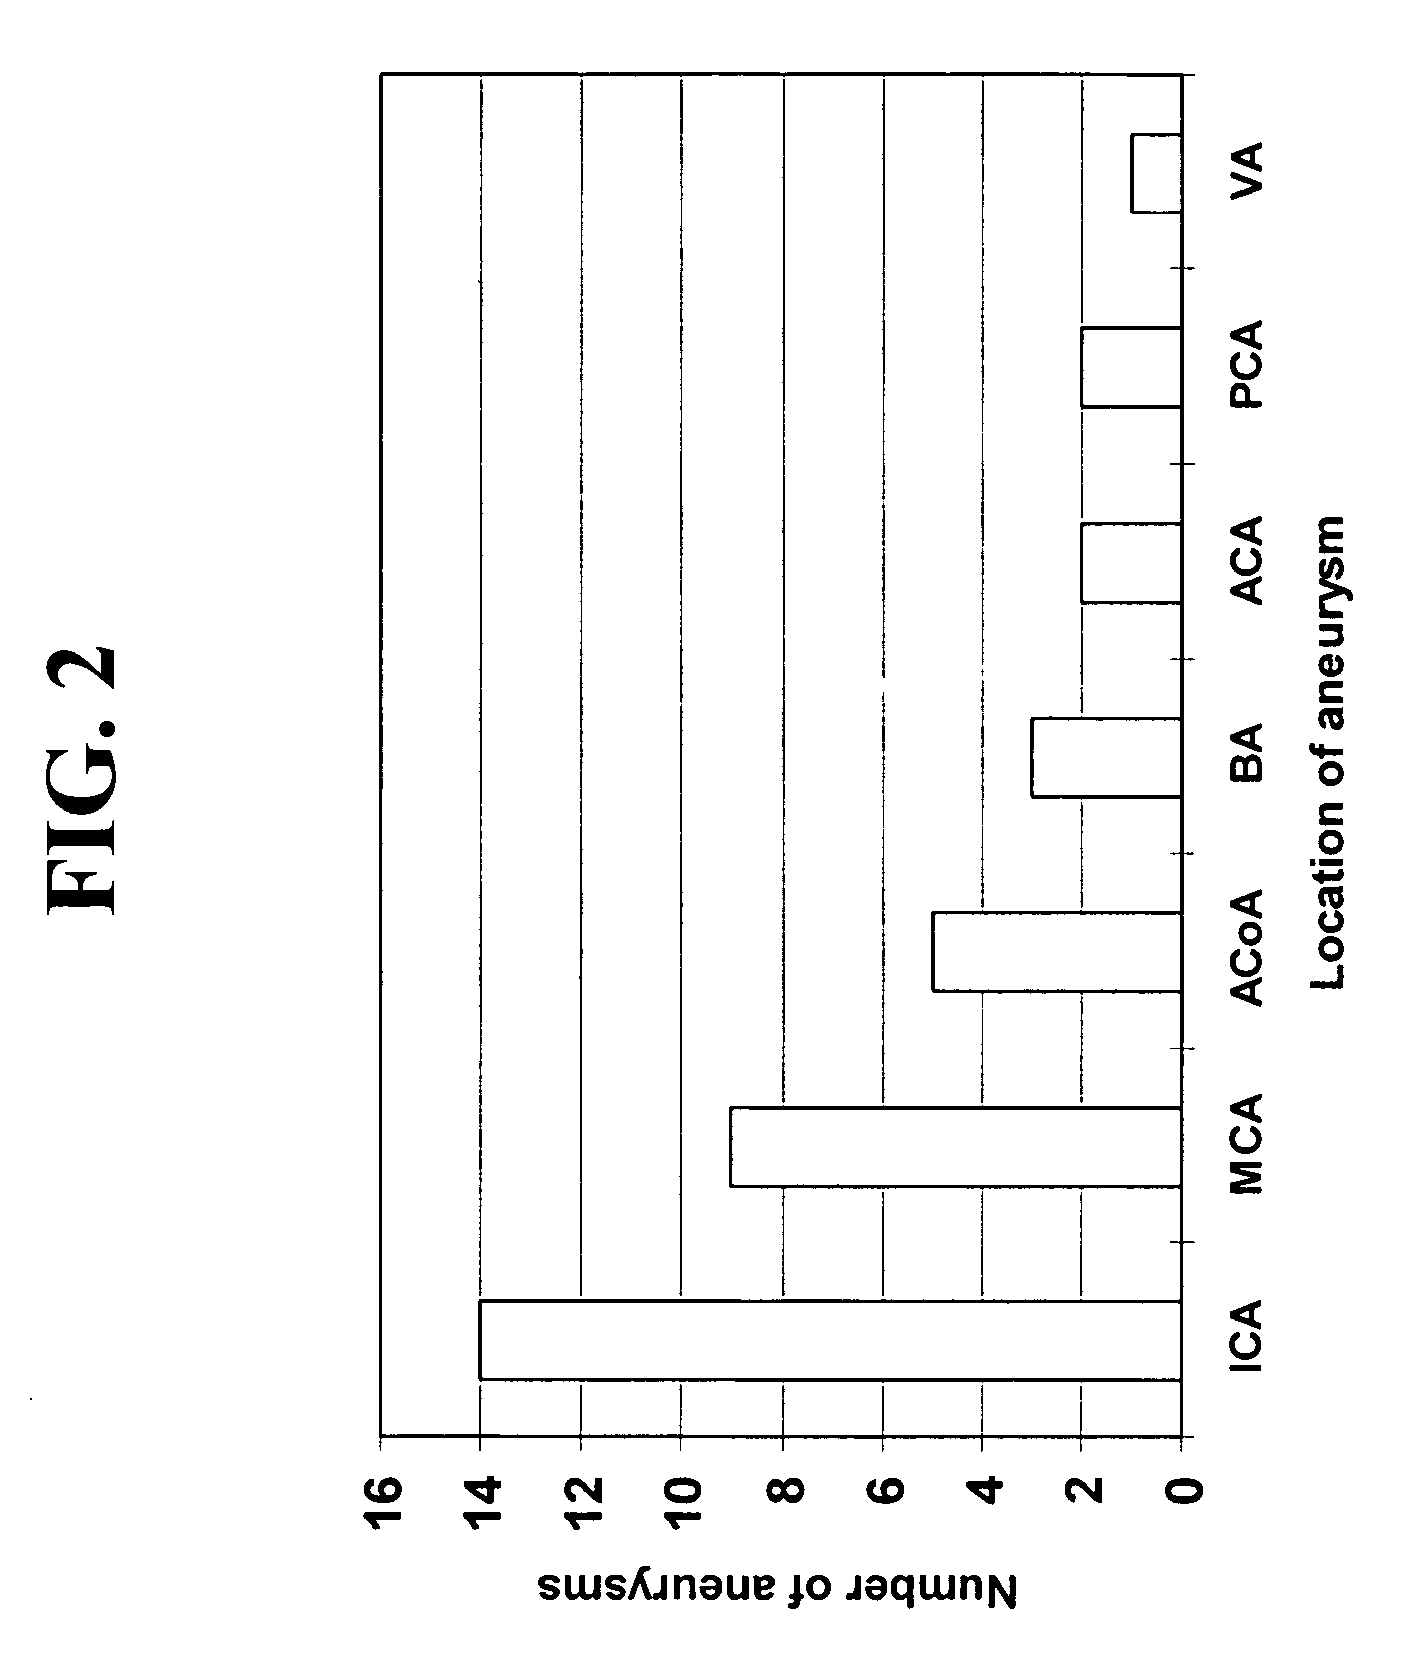 Method for detection of abnormalities in three-dimensional imaging data